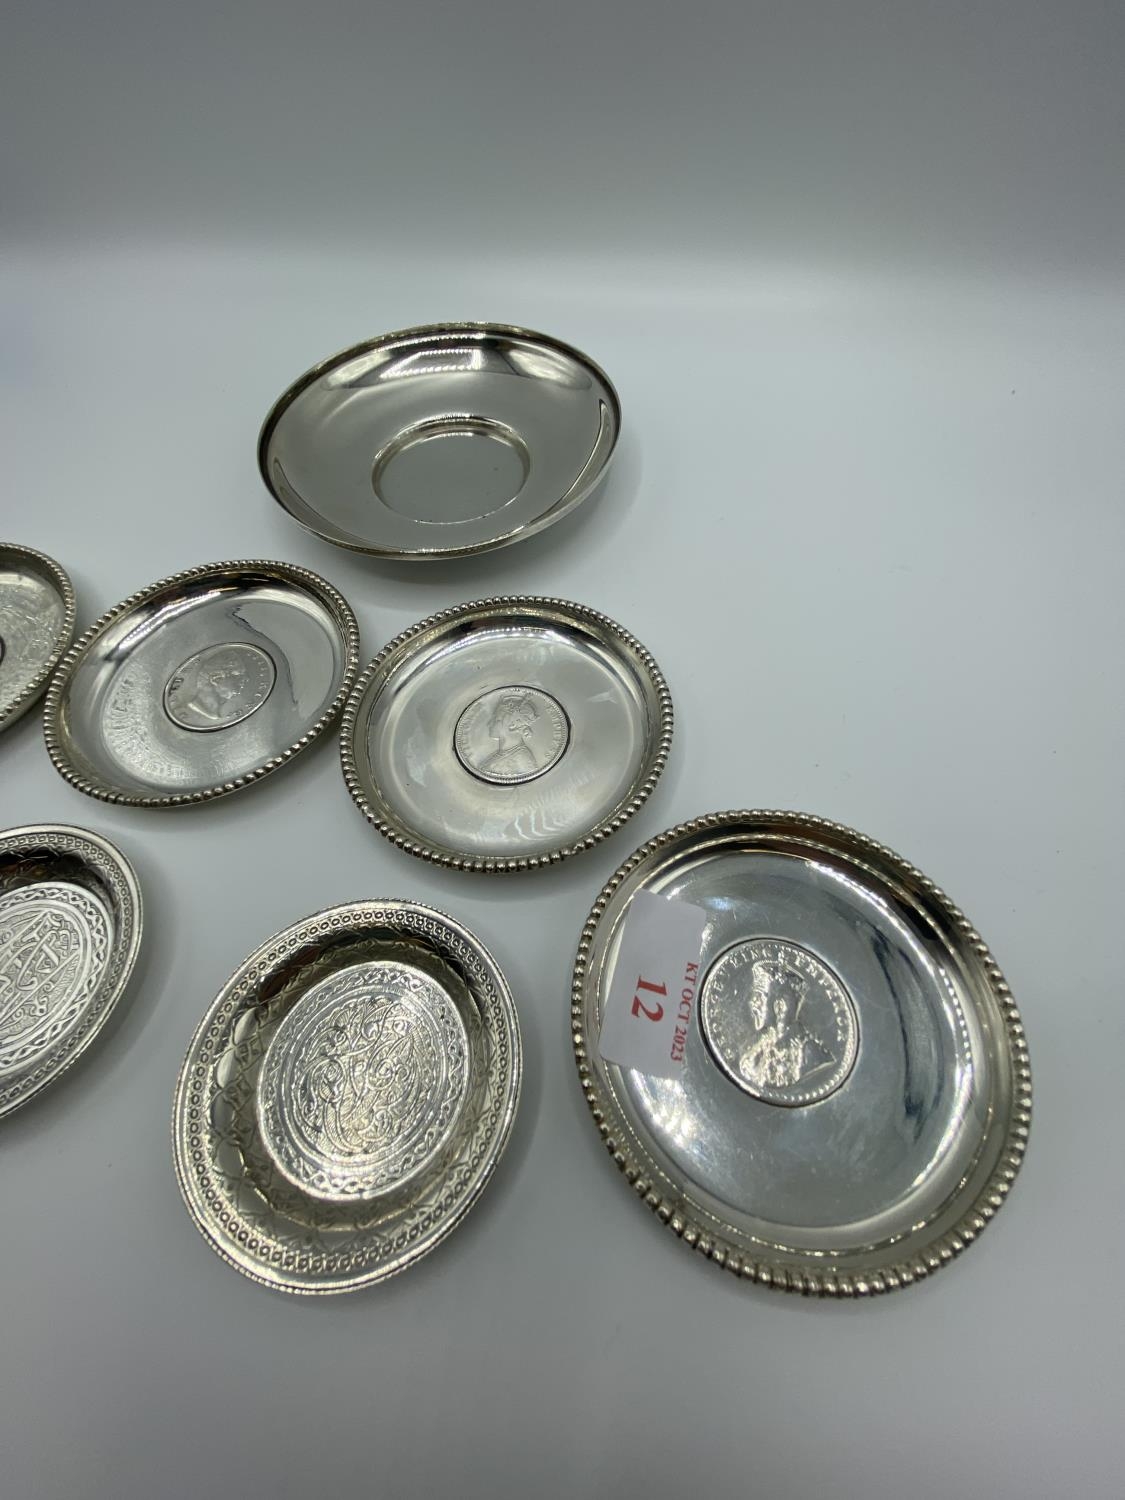 A set of 4 silver coin set pin dishes and a sterling silver example and 2 unmarked white metal - Image 3 of 10